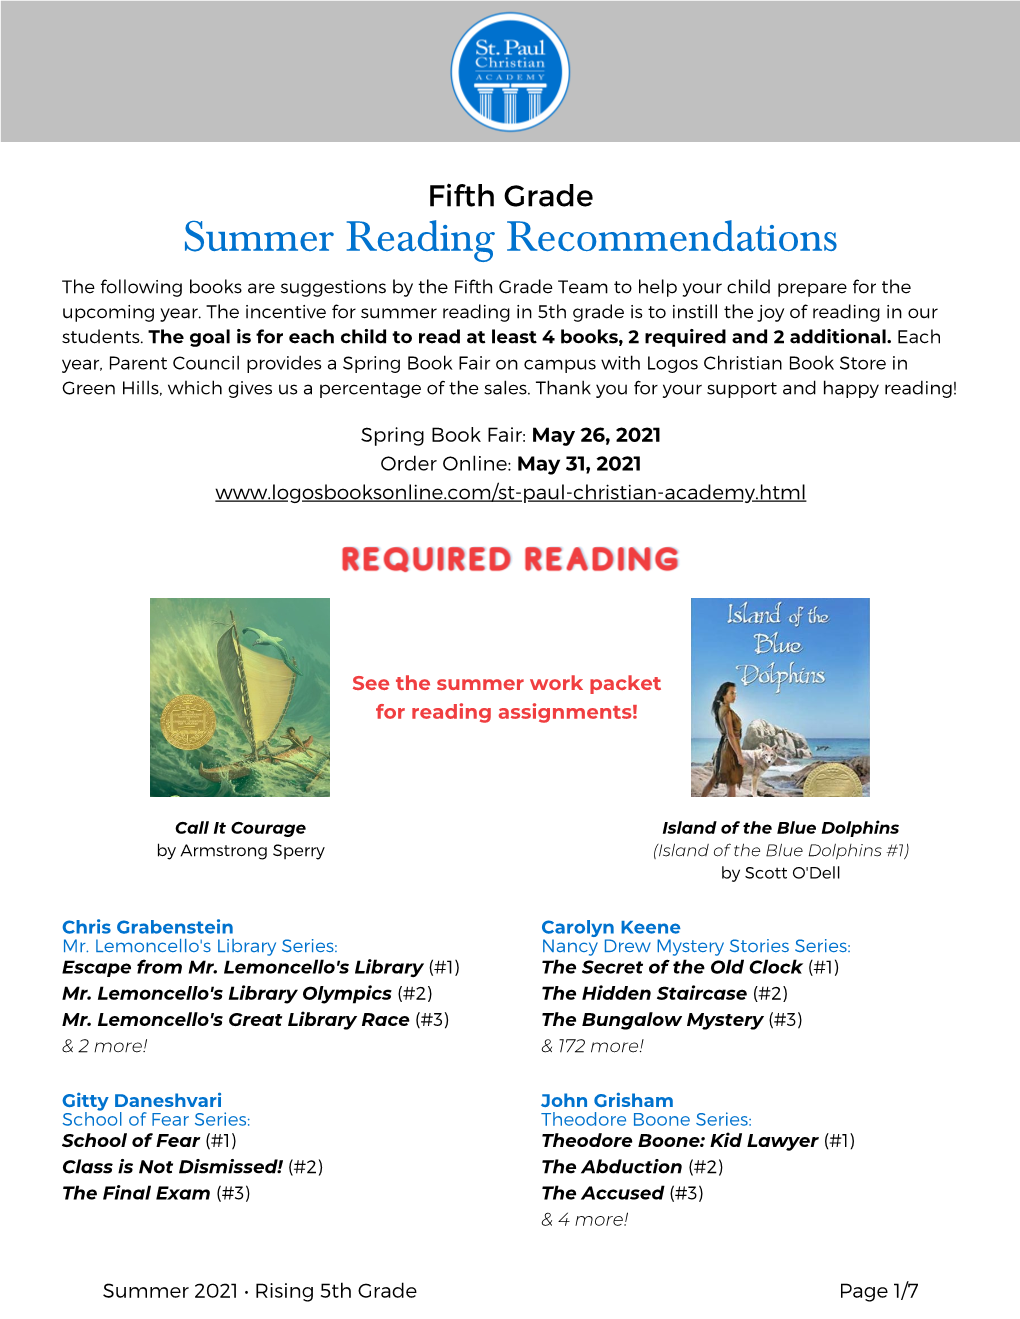 Summer Reading Recommendations the Following Books Are Suggestions by the Fifth Grade Team to Help Your Child Prepare for the Upcoming Year